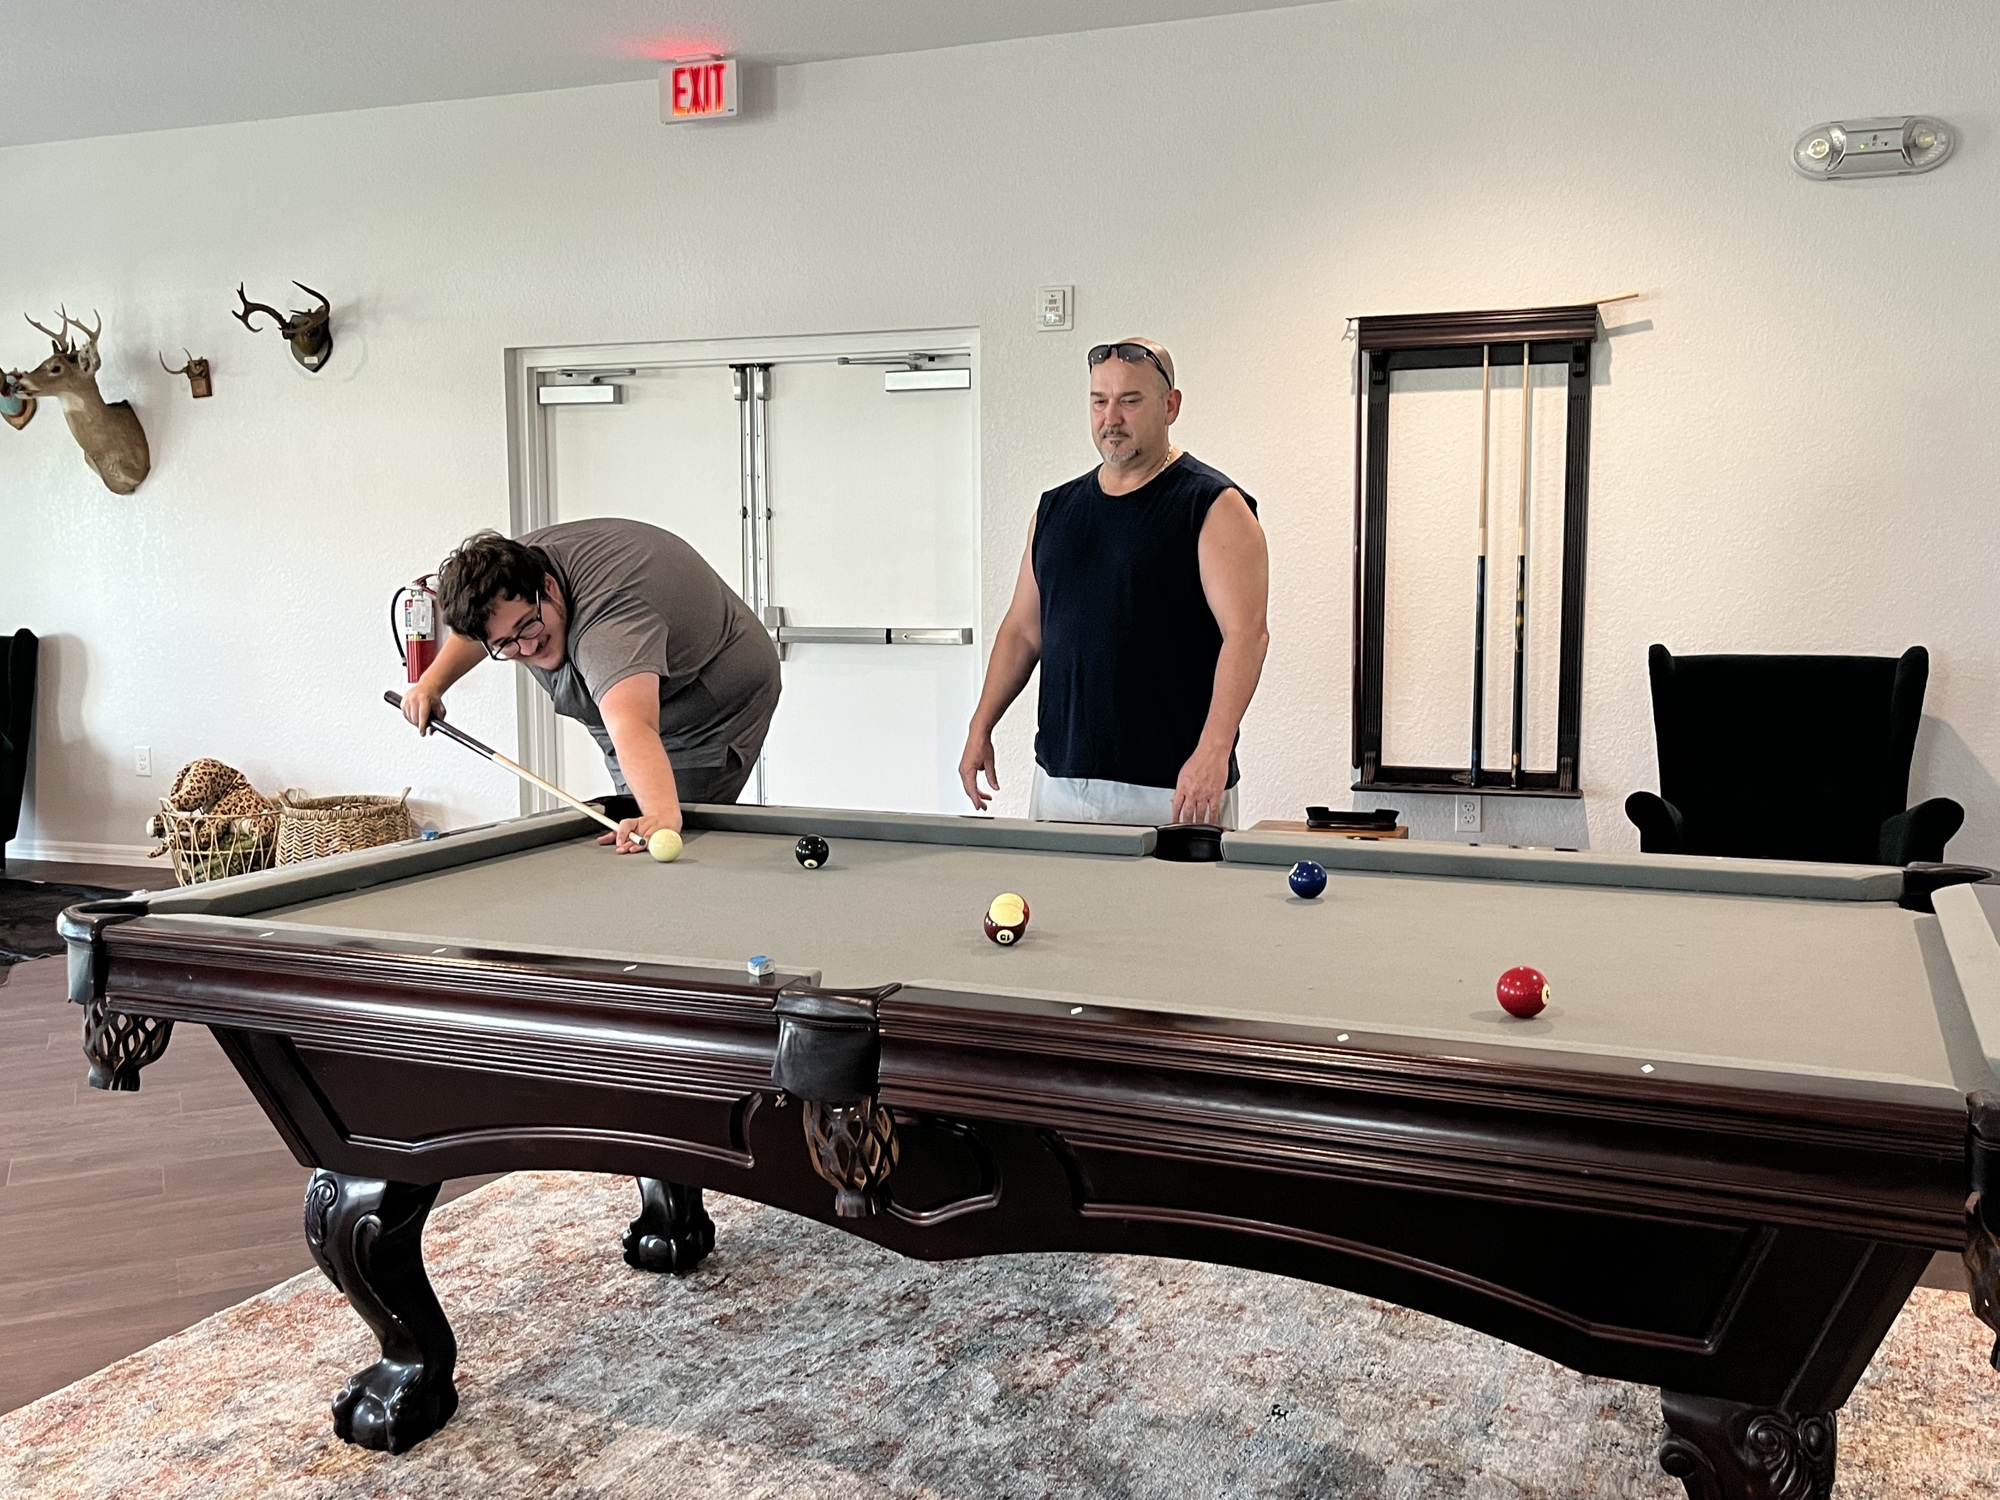 Bryson Babineaux plays pool with his dad, Brandon Babineaux in the clubhouse. The Babineauxs, who are insurance adjusters, are staying at Linger Lodge RV Park helping in the aftermath of Hurricane Ian. (Photo by Liz Ramos)